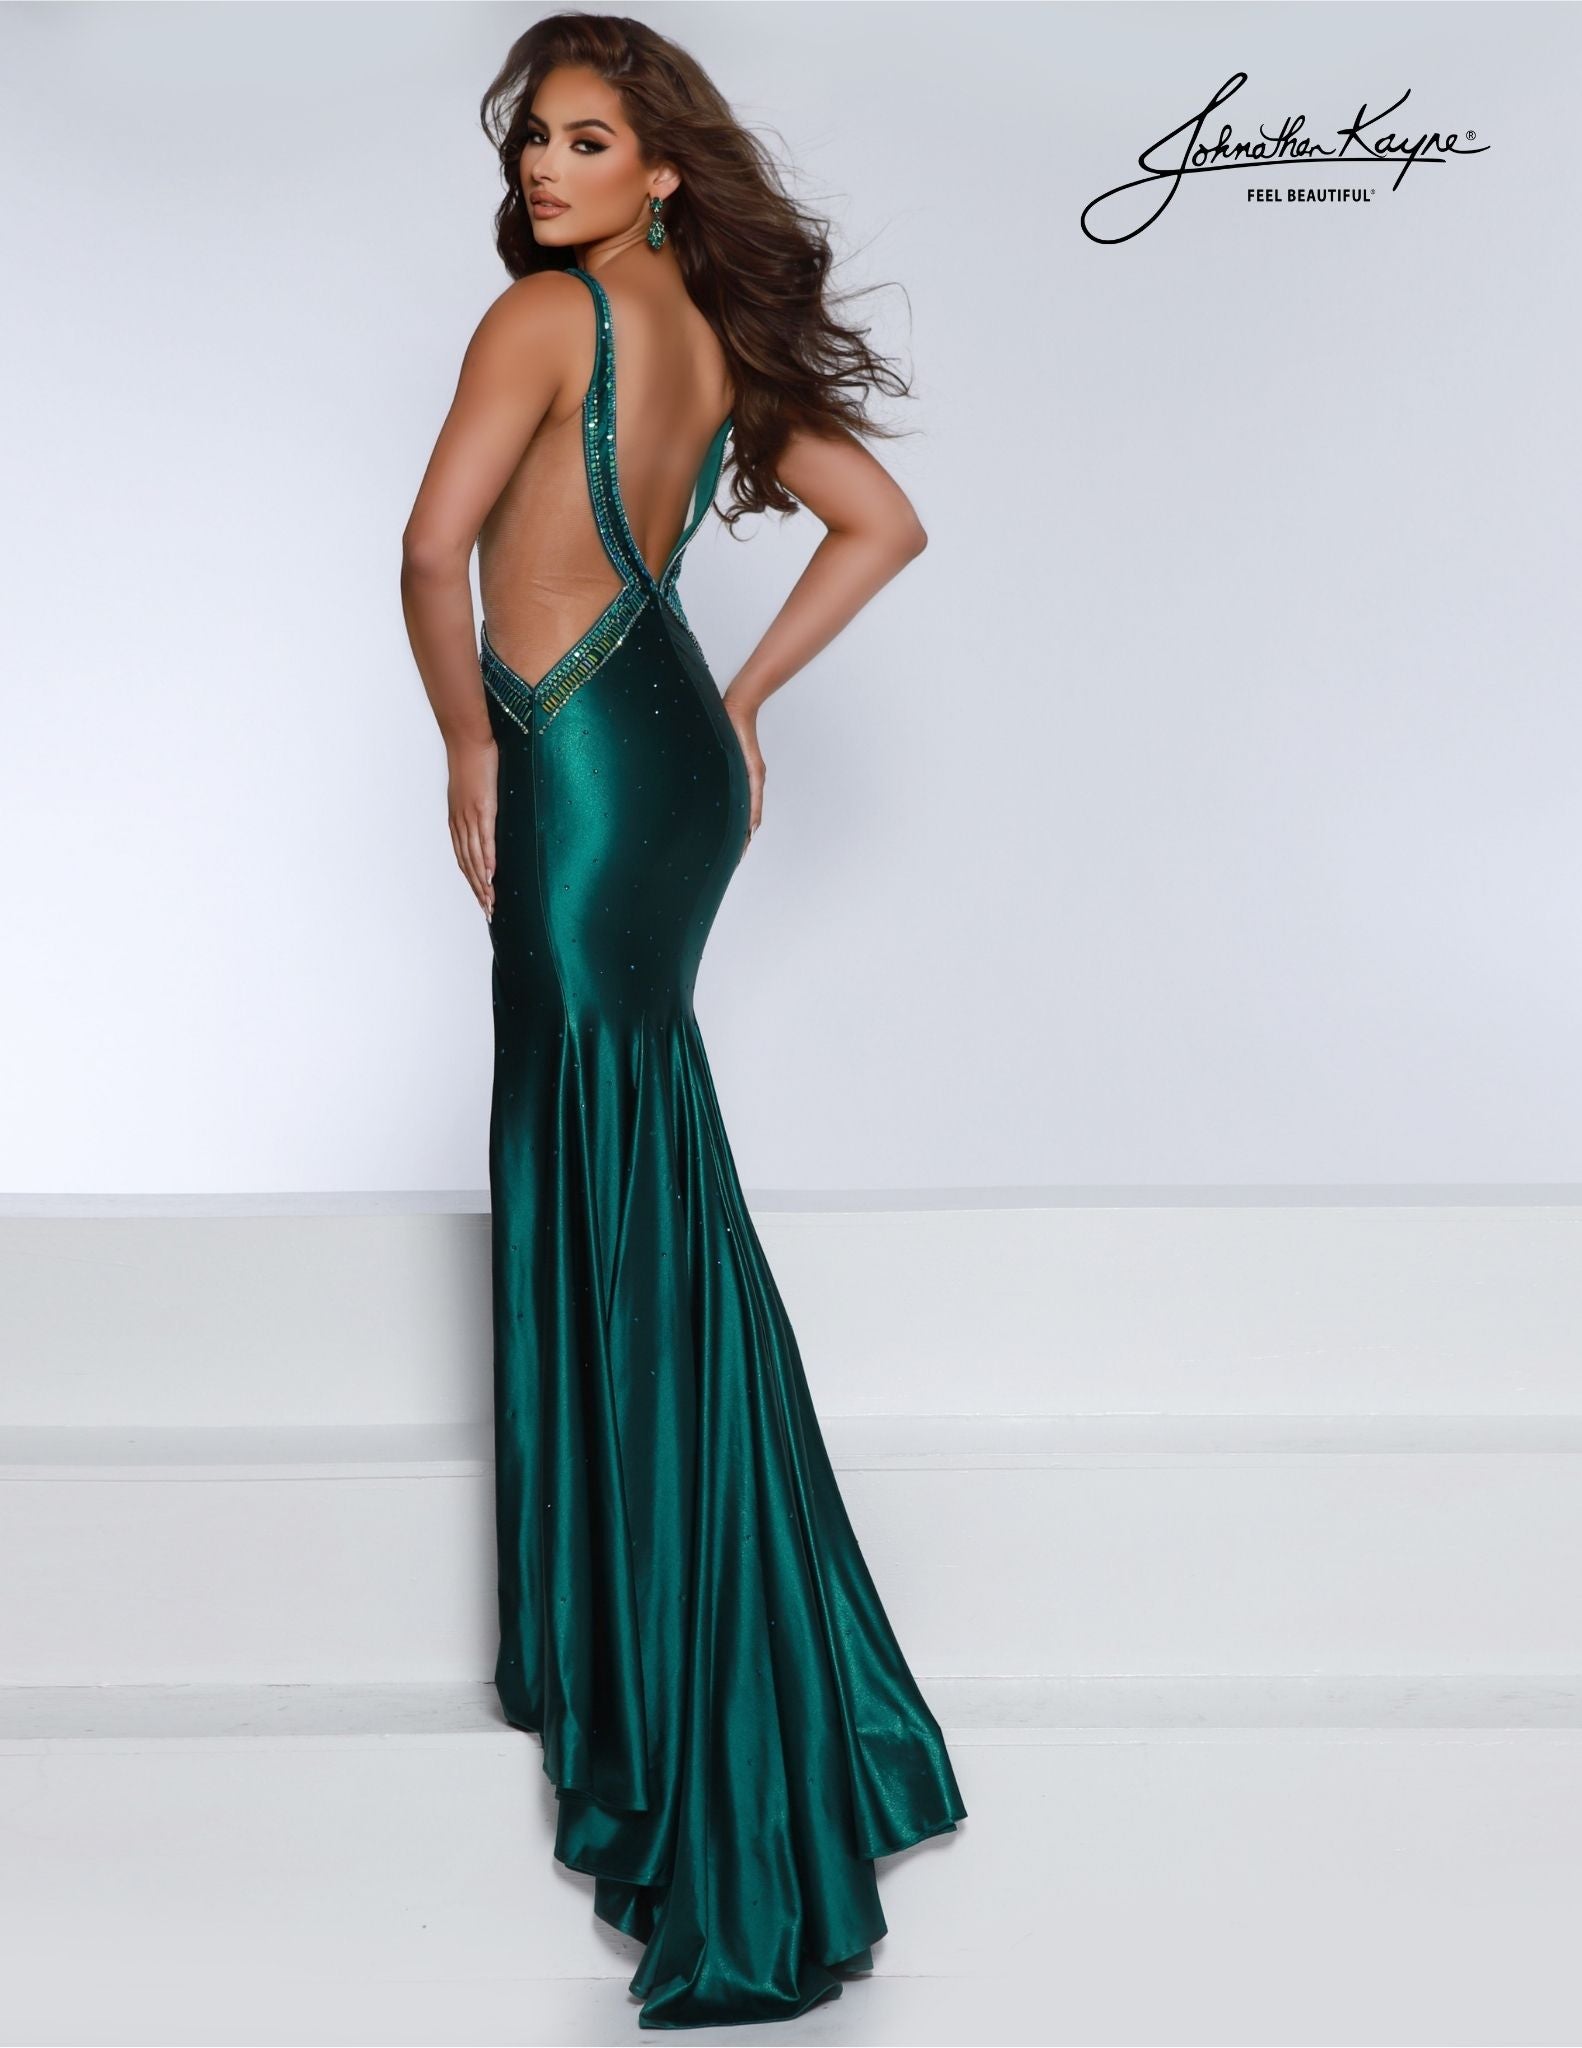 Look stunning for your next special event in this Johnathan Kayne 2857 Long Prom Dress. It features a plunging neckline, encrusted beading along the  sheer side cutout, and an intricate beaded pattern throughout. Perfect for any formal occasion, this glamorous gown will make you shine. Prepare to turn every head in the room in this Shiny 4 Way Stretch Lycra gown. 